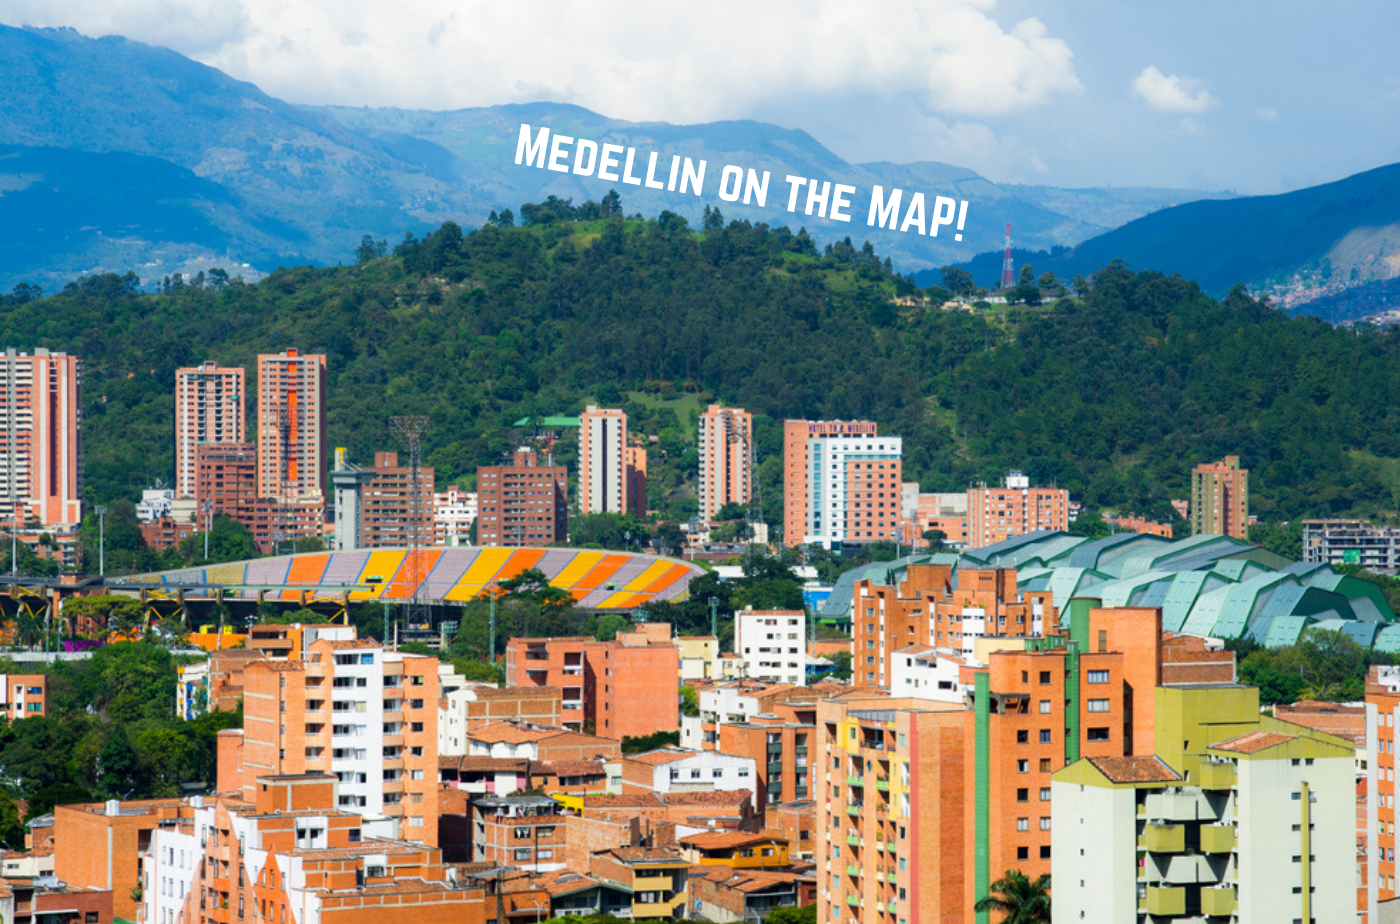 Medellin on the map concert